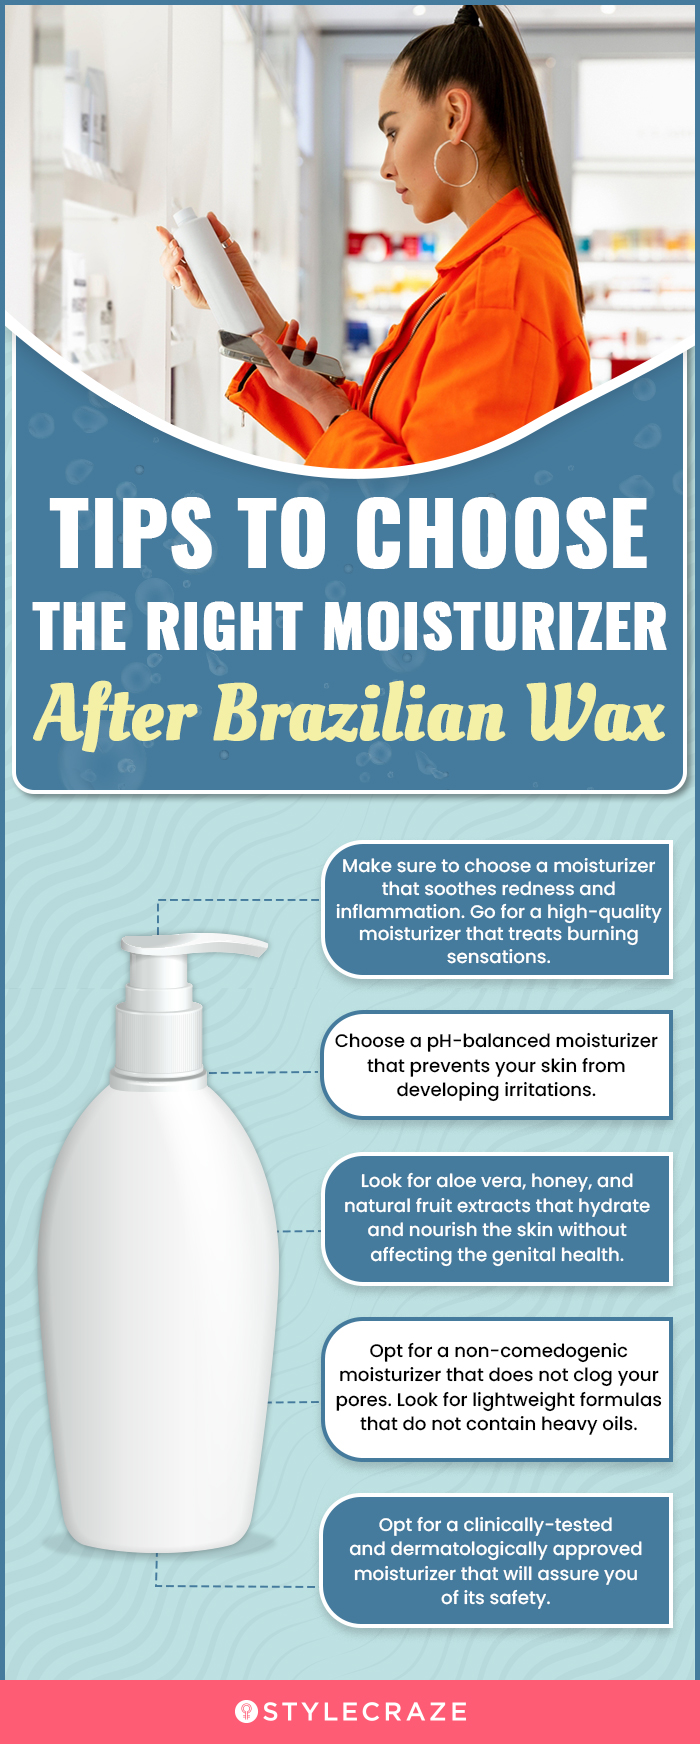 Tips To Choose The Right Moisturizer After Brazilian Wax (infographic)